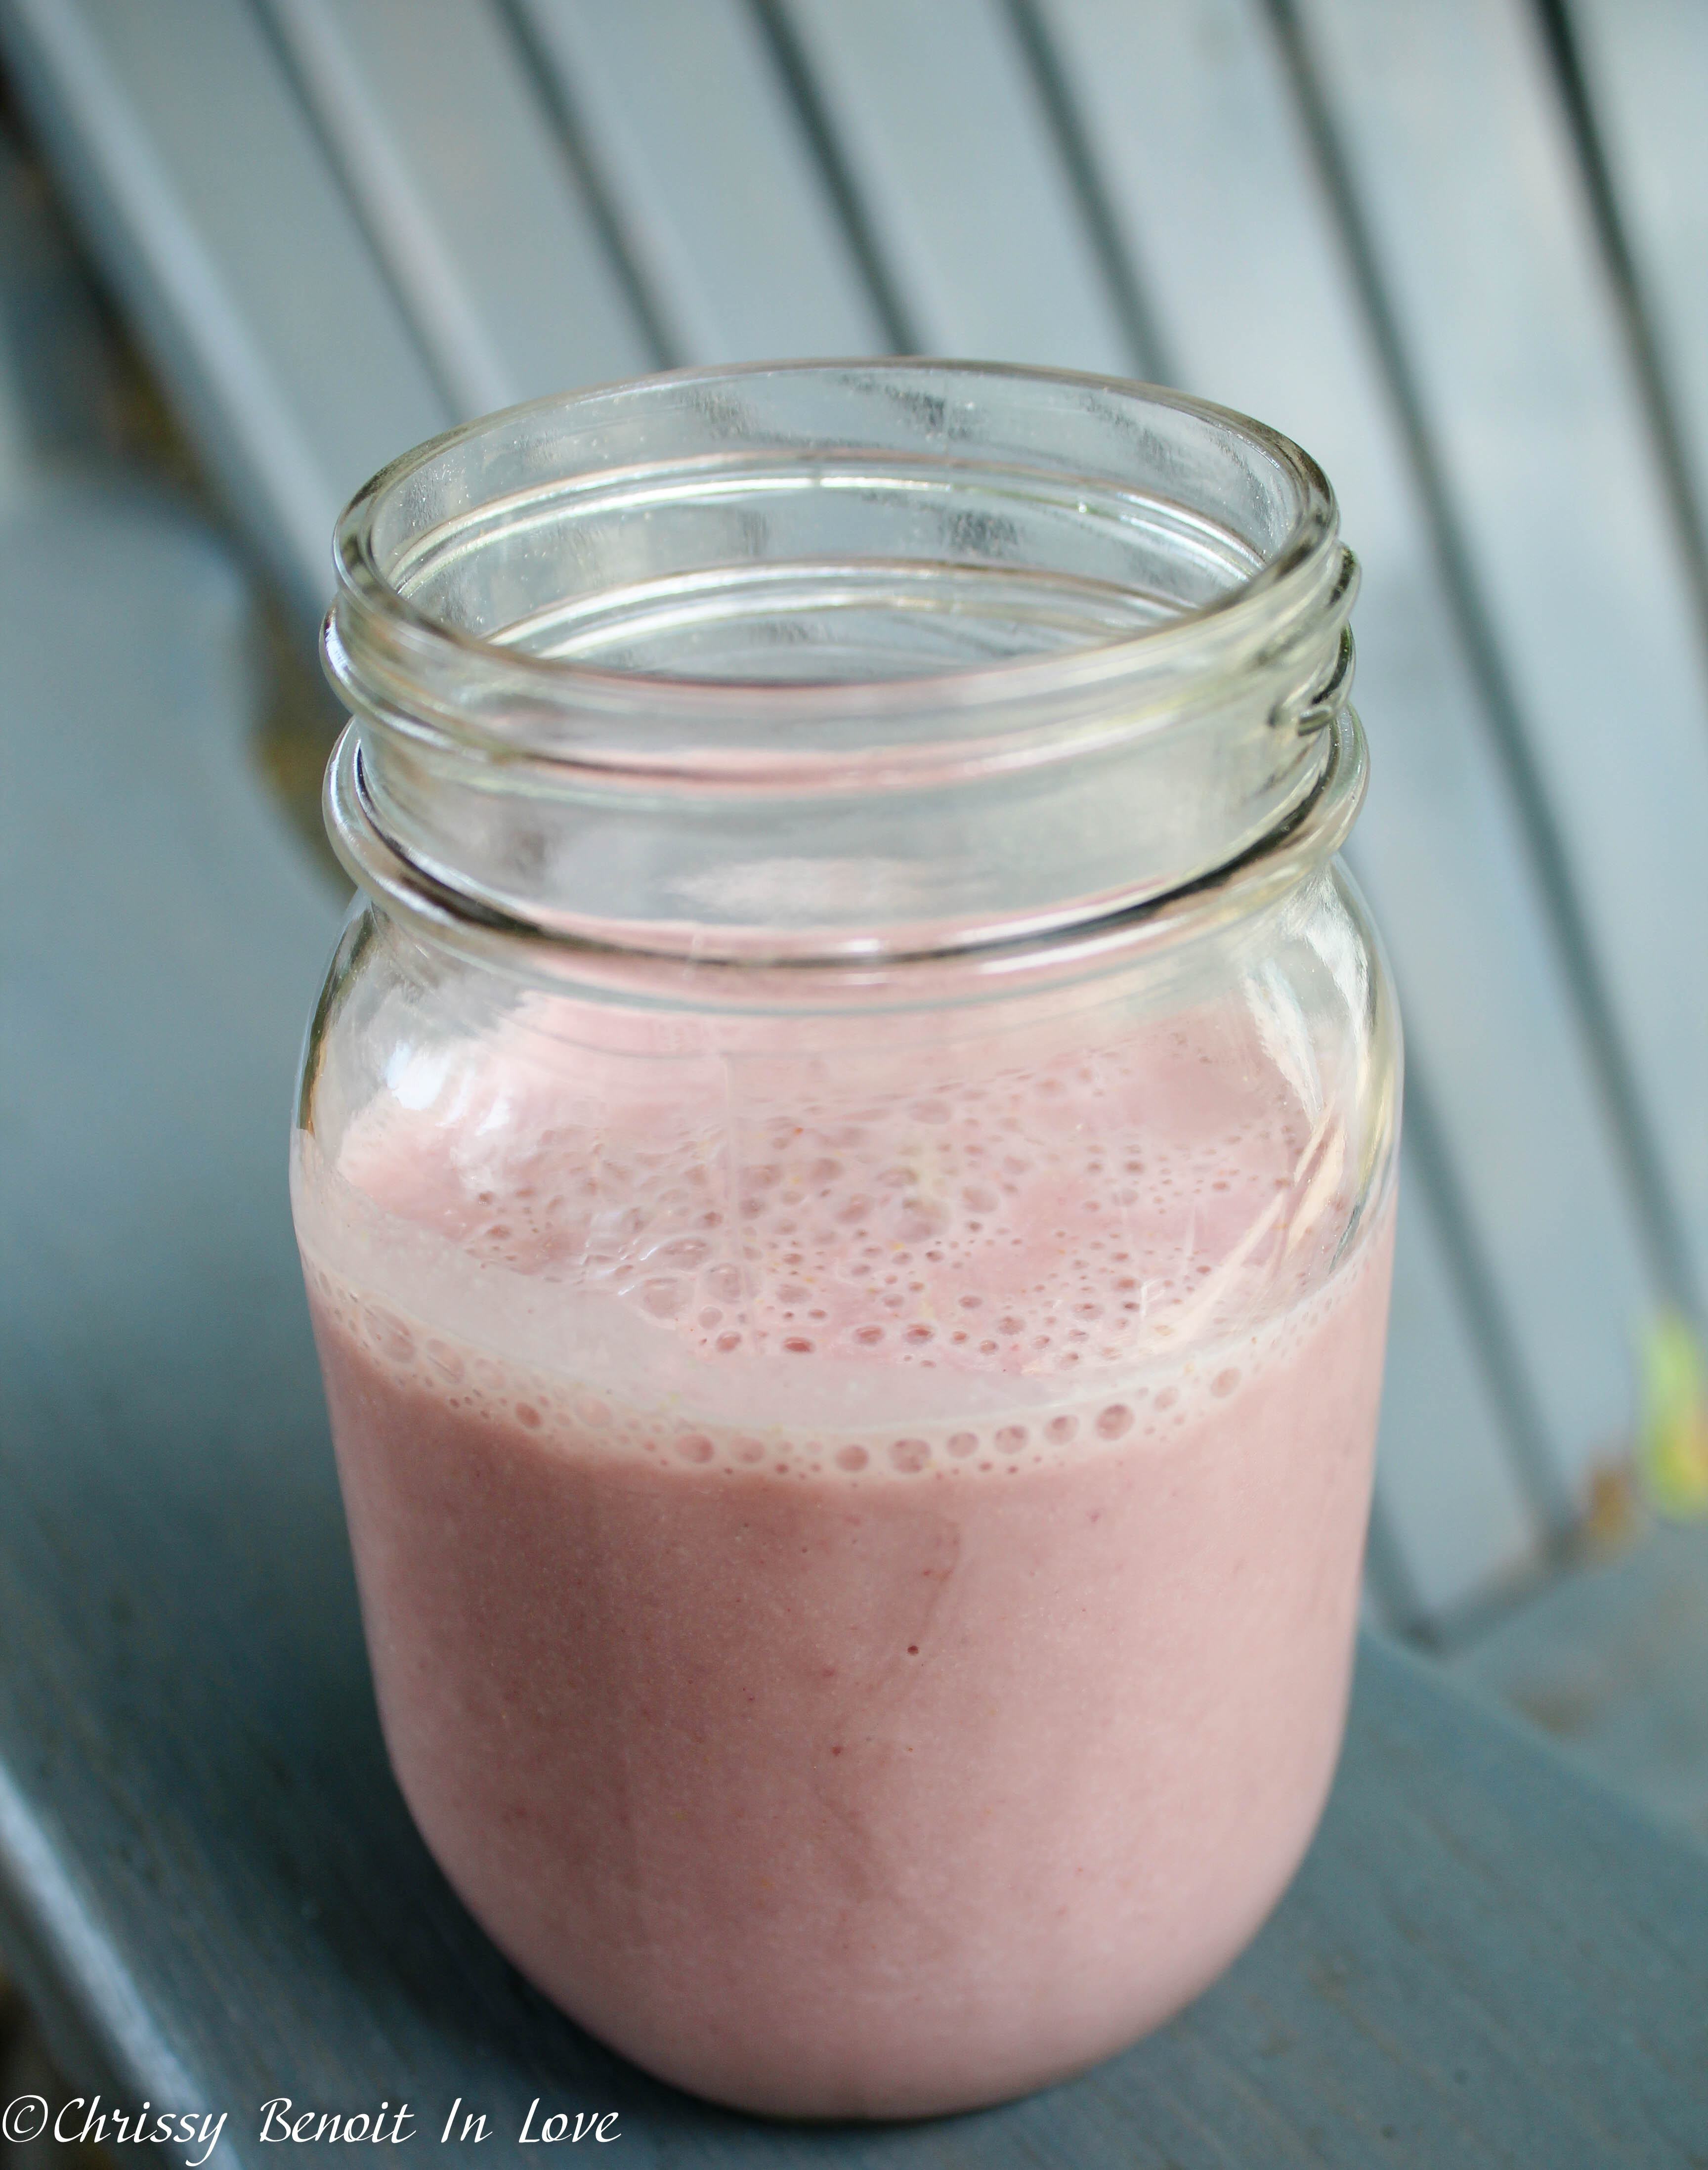 Peanut Butter & Jelly Sandwich Smoothie (THM FP with S option)